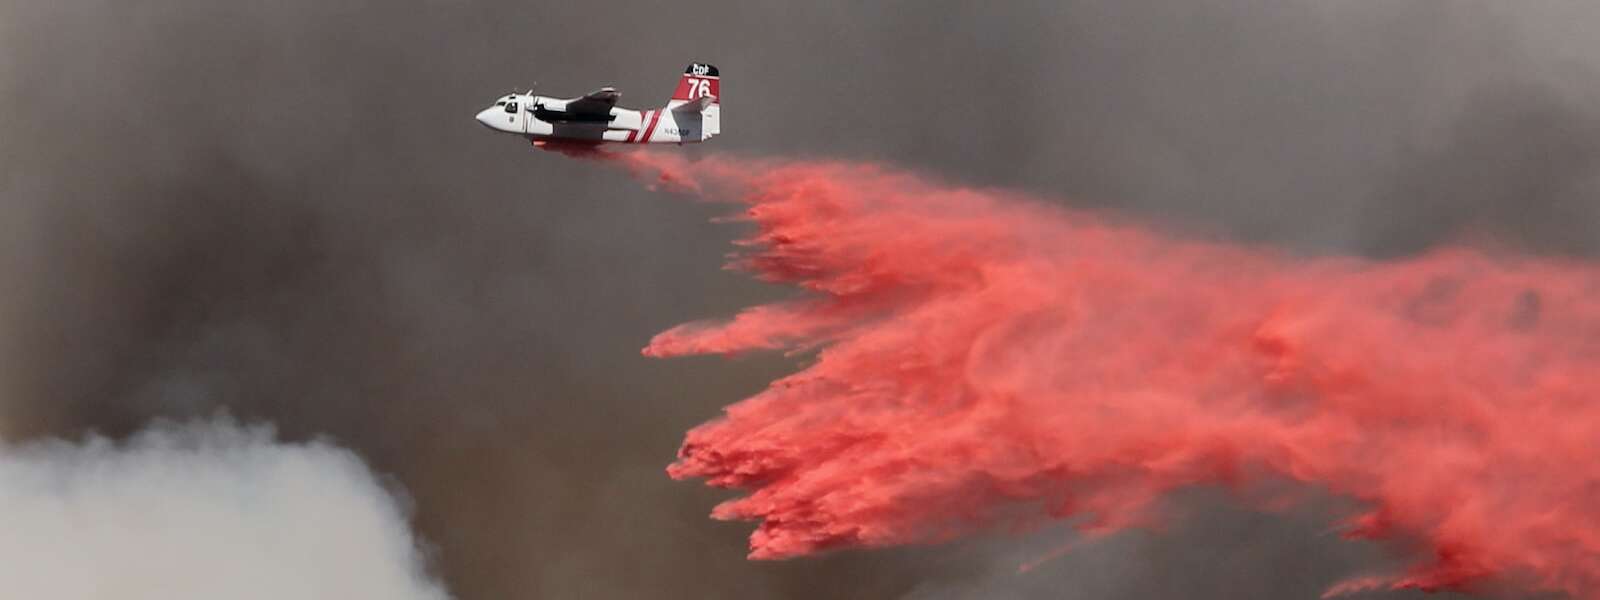 white and red airplane pouring red powder on fire